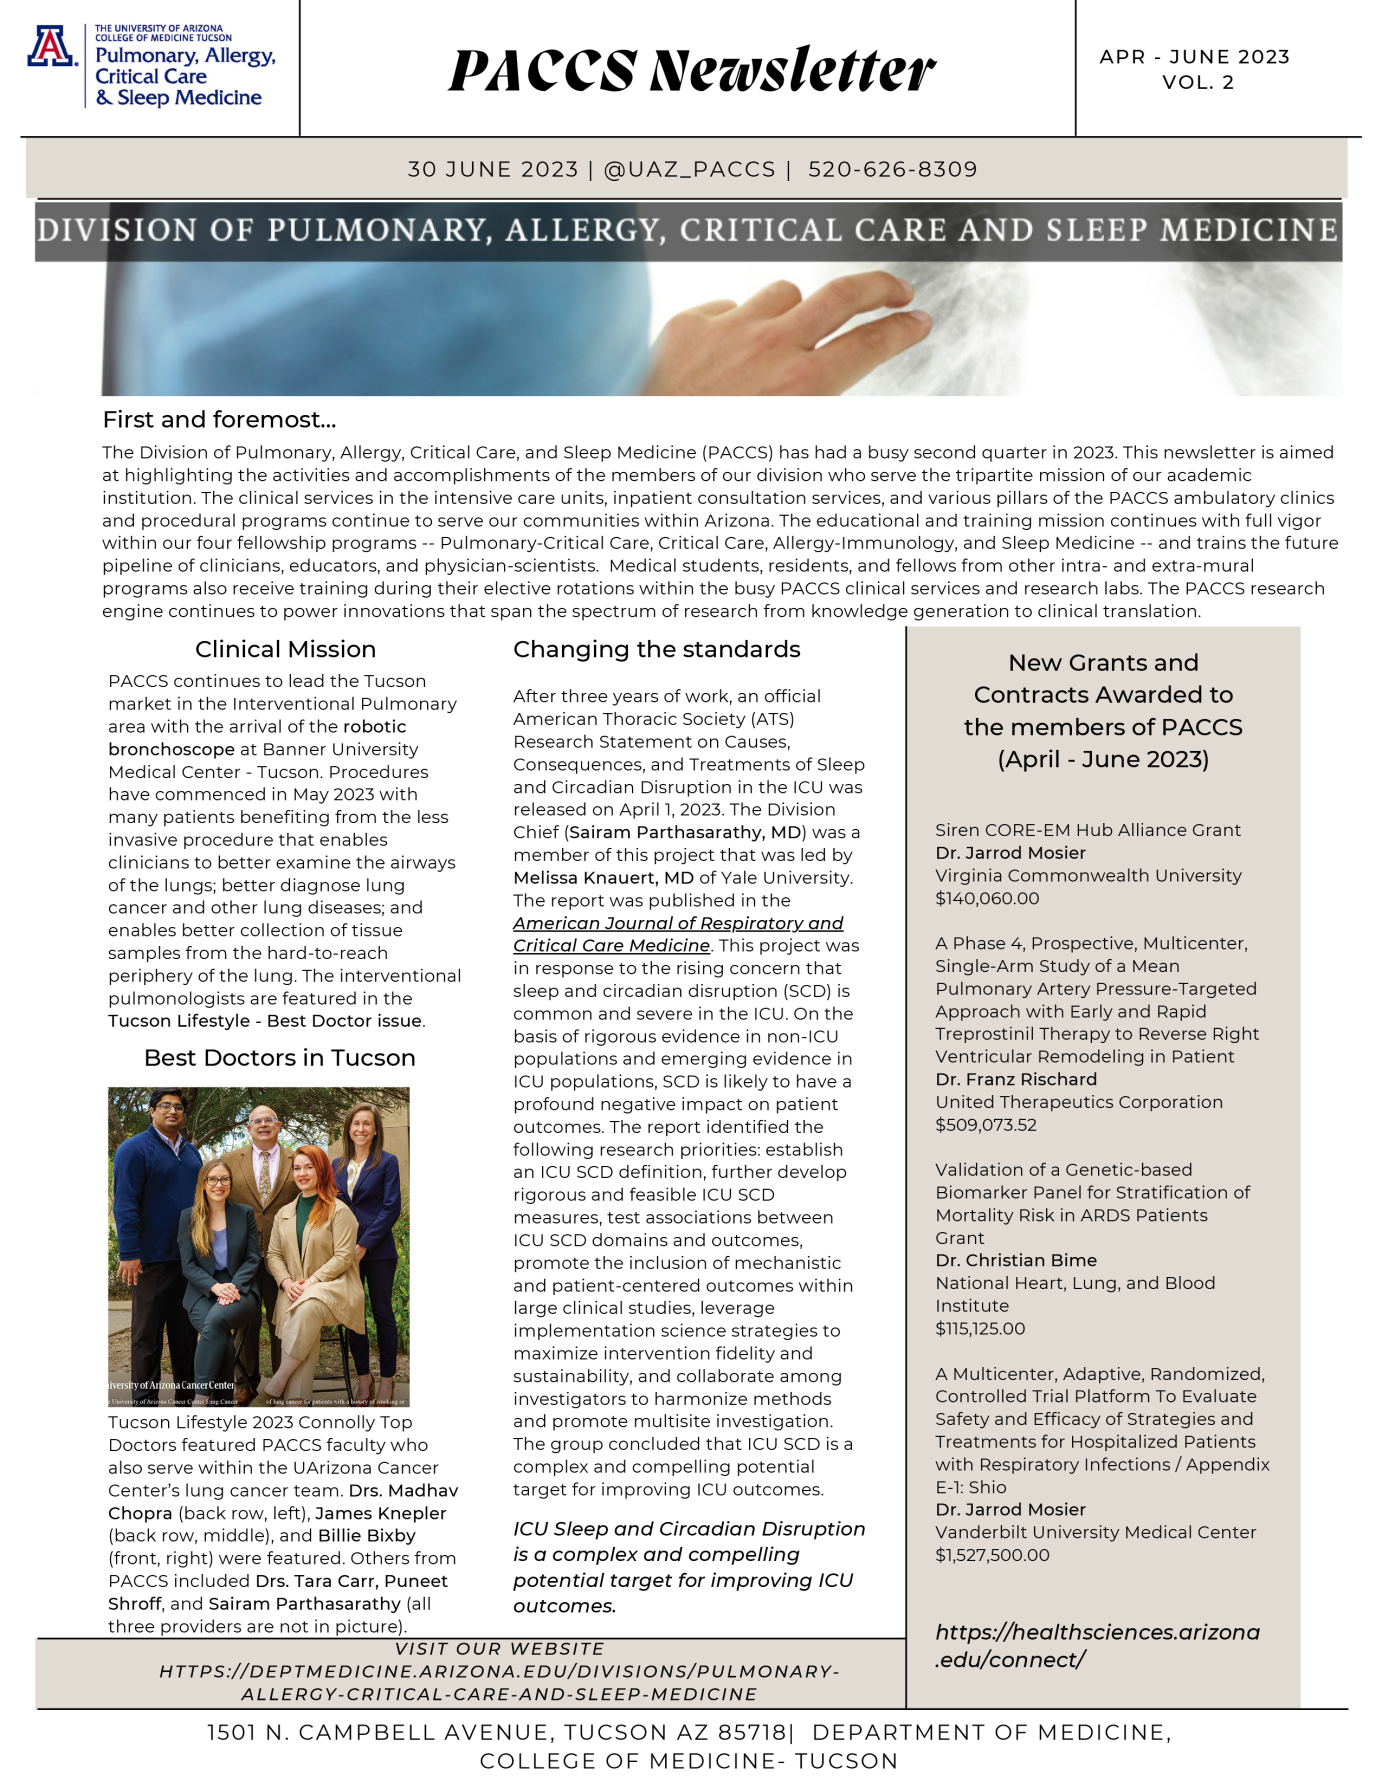 Cover of April-June 2023 issue of PACCS Newsletter, a quarterly publication of the University of Arizona Division of Pulmonary, Allergy, Critical Care and Sleep Medicine